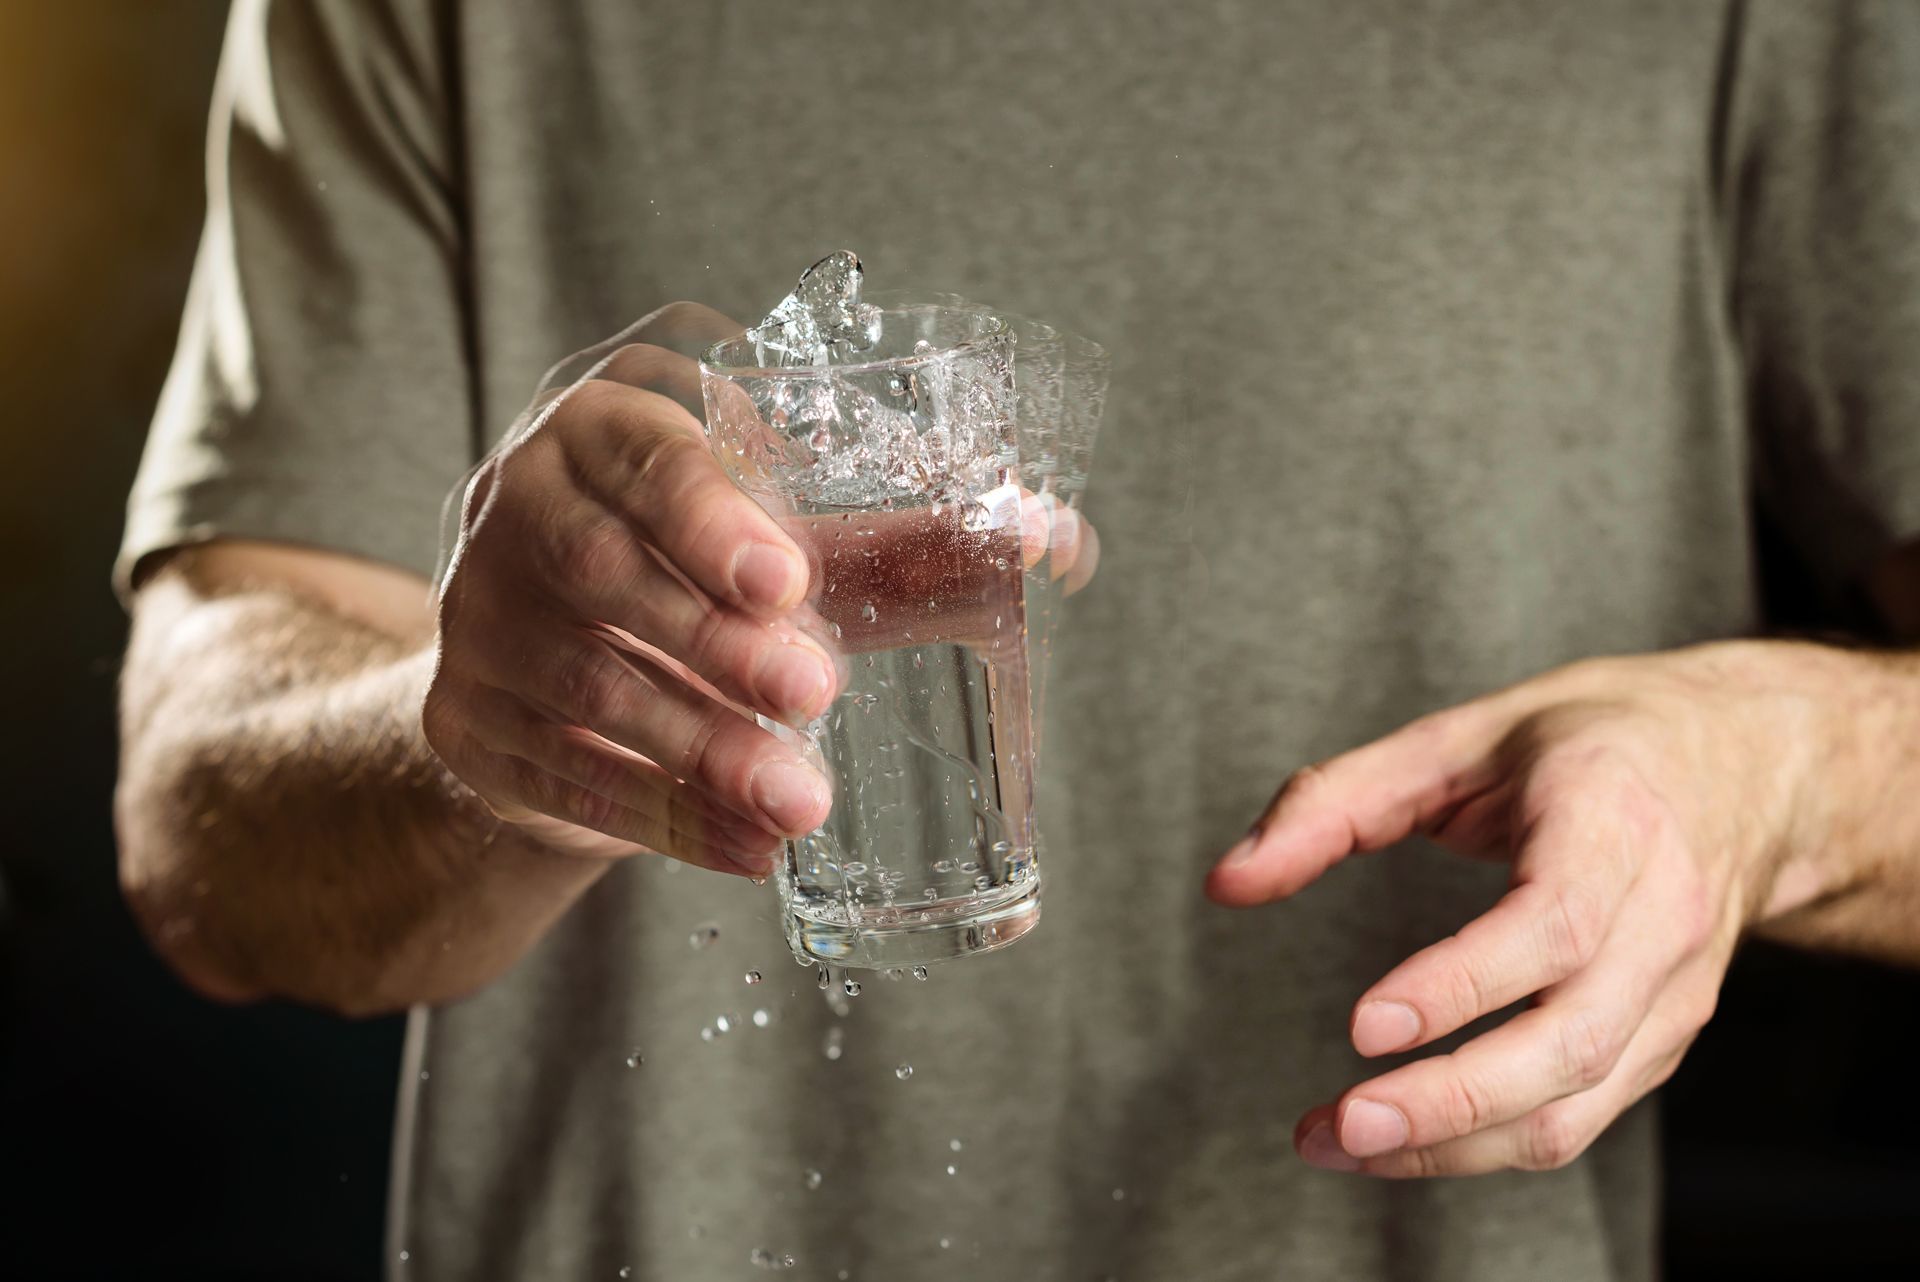 A man is holding a glass of water in his shaky hands